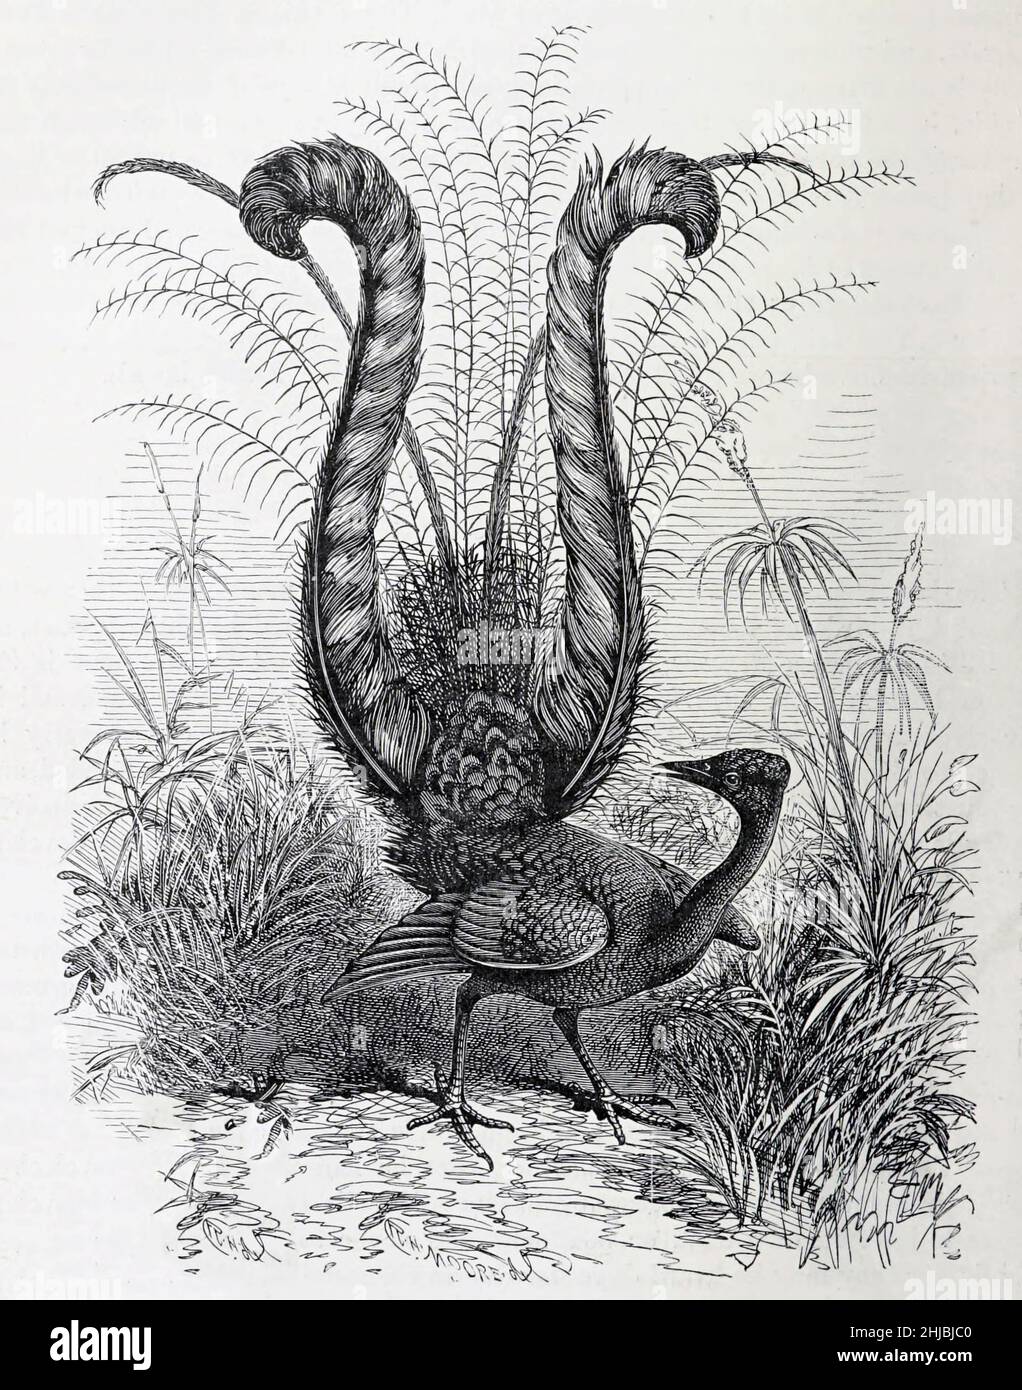 Male superb lyrebird or Lyre-Bird (Menura novaehollandiae) displaying his fancy tail, from the The royal natural history edited by Richard Lydekker, Volume III published in 1893 Stock Photo